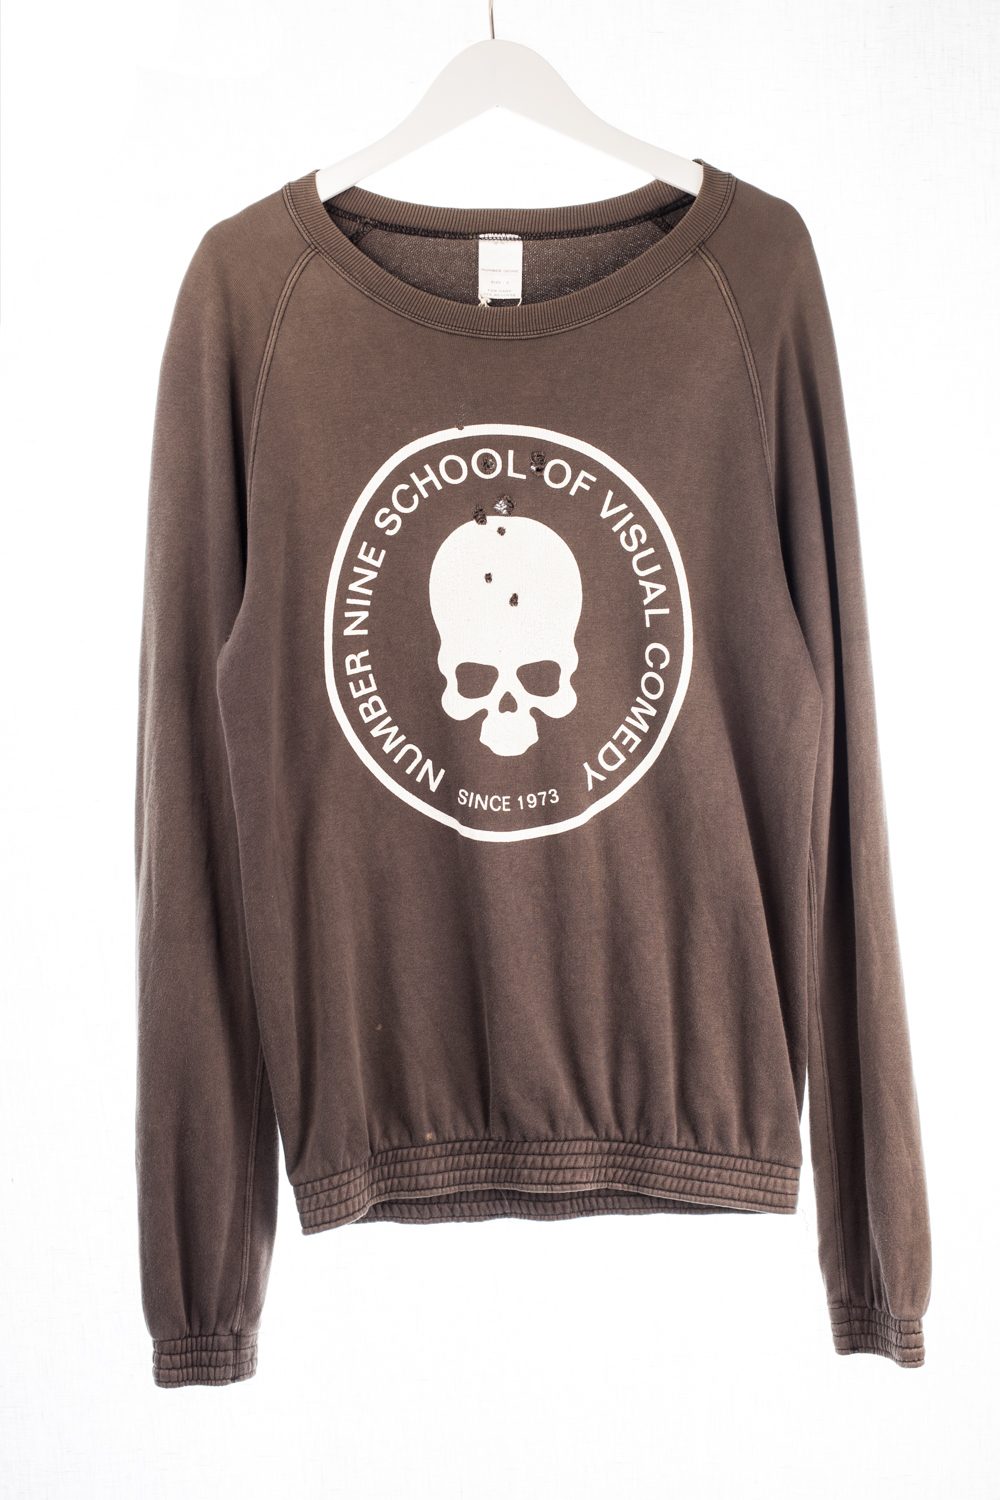 “School of Visual Comedy” Distressed Pullover